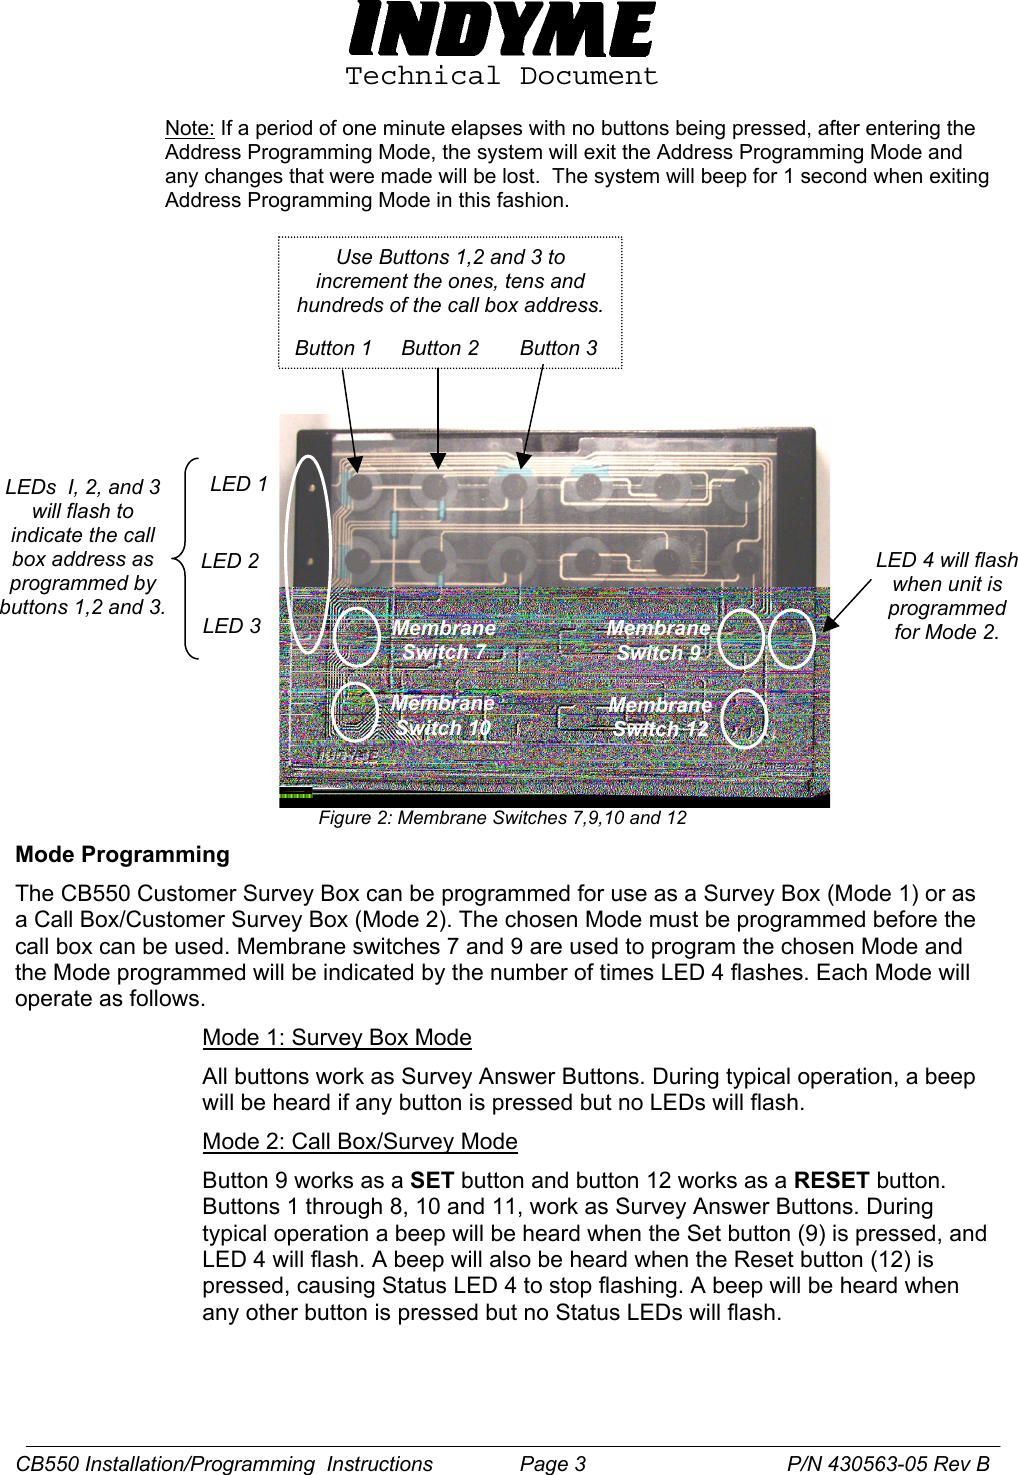  Technical Document  Note: If a period of one minute elapses with no buttons being pressed, after entering the Address Programming Mode, the system will exit the Address Programming Mode and any changes that were made will be lost.  The system will beep for 1 second when exiting Address Programming Mode in this fashion.                Figure 2: Membrane Switches 7,9,10 and 12 Membrane Switch 10 Membrane Switch 12 Membrane Switch 7 Membrane Switch 9    LED 1  LED 2  LED 3 LEDs  I, 2, and 3 will flash to indicate the call box address as programmed by buttons 1,2 and 3. Use Buttons 1,2 and 3 to increment the ones, tens and hundreds of the call box address.  Button 1     Button 2  Button 3 LED 4 will flash when unit is programmed for Mode 2. Mode Programming  The CB550 Customer Survey Box can be programmed for use as a Survey Box (Mode 1) or as a Call Box/Customer Survey Box (Mode 2). The chosen Mode must be programmed before the call box can be used. Membrane switches 7 and 9 are used to program the chosen Mode and the Mode programmed will be indicated by the number of times LED 4 flashes. Each Mode will operate as follows. Mode 1: Survey Box Mode All buttons work as Survey Answer Buttons. During typical operation, a beep will be heard if any button is pressed but no LEDs will flash. Mode 2: Call Box/Survey Mode Button 9 works as a SET button and button 12 works as a RESET button. Buttons 1 through 8, 10 and 11, work as Survey Answer Buttons. During typical operation a beep will be heard when the Set button (9) is pressed, and LED 4 will flash. A beep will also be heard when the Reset button (12) is pressed, causing Status LED 4 to stop flashing. A beep will be heard when any other button is pressed but no Status LEDs will flash.  CB550 Installation/Programming  Instructions               Page 3   P/N 430563-05 Rev B 